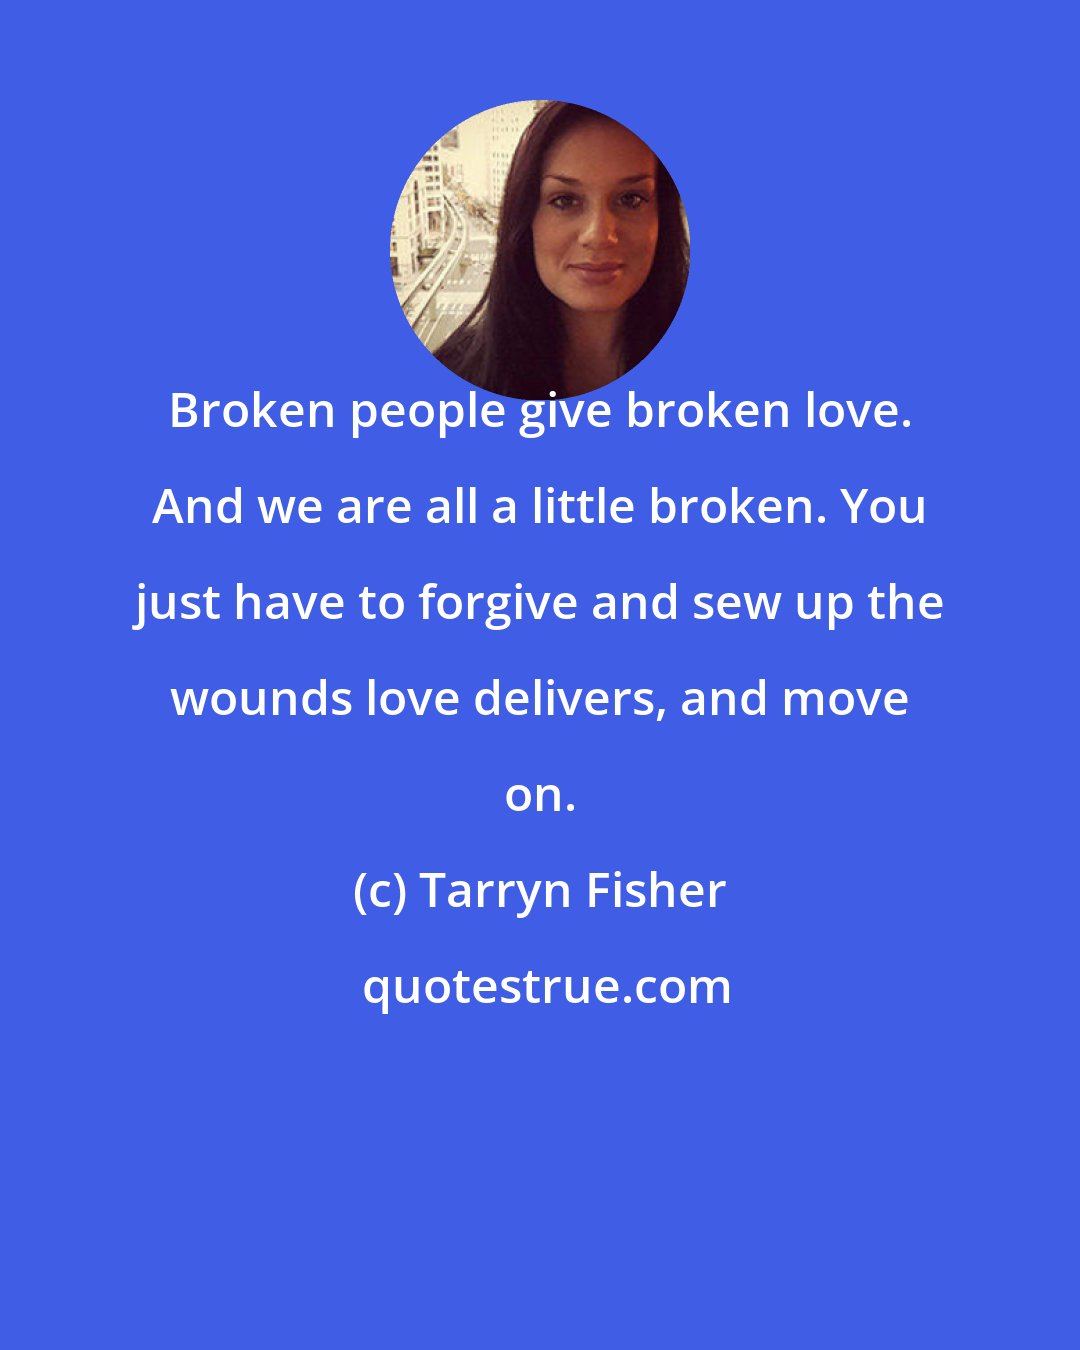 Tarryn Fisher: Broken people give broken love. And we are all a little broken. You just have to forgive and sew up the wounds love delivers, and move on.